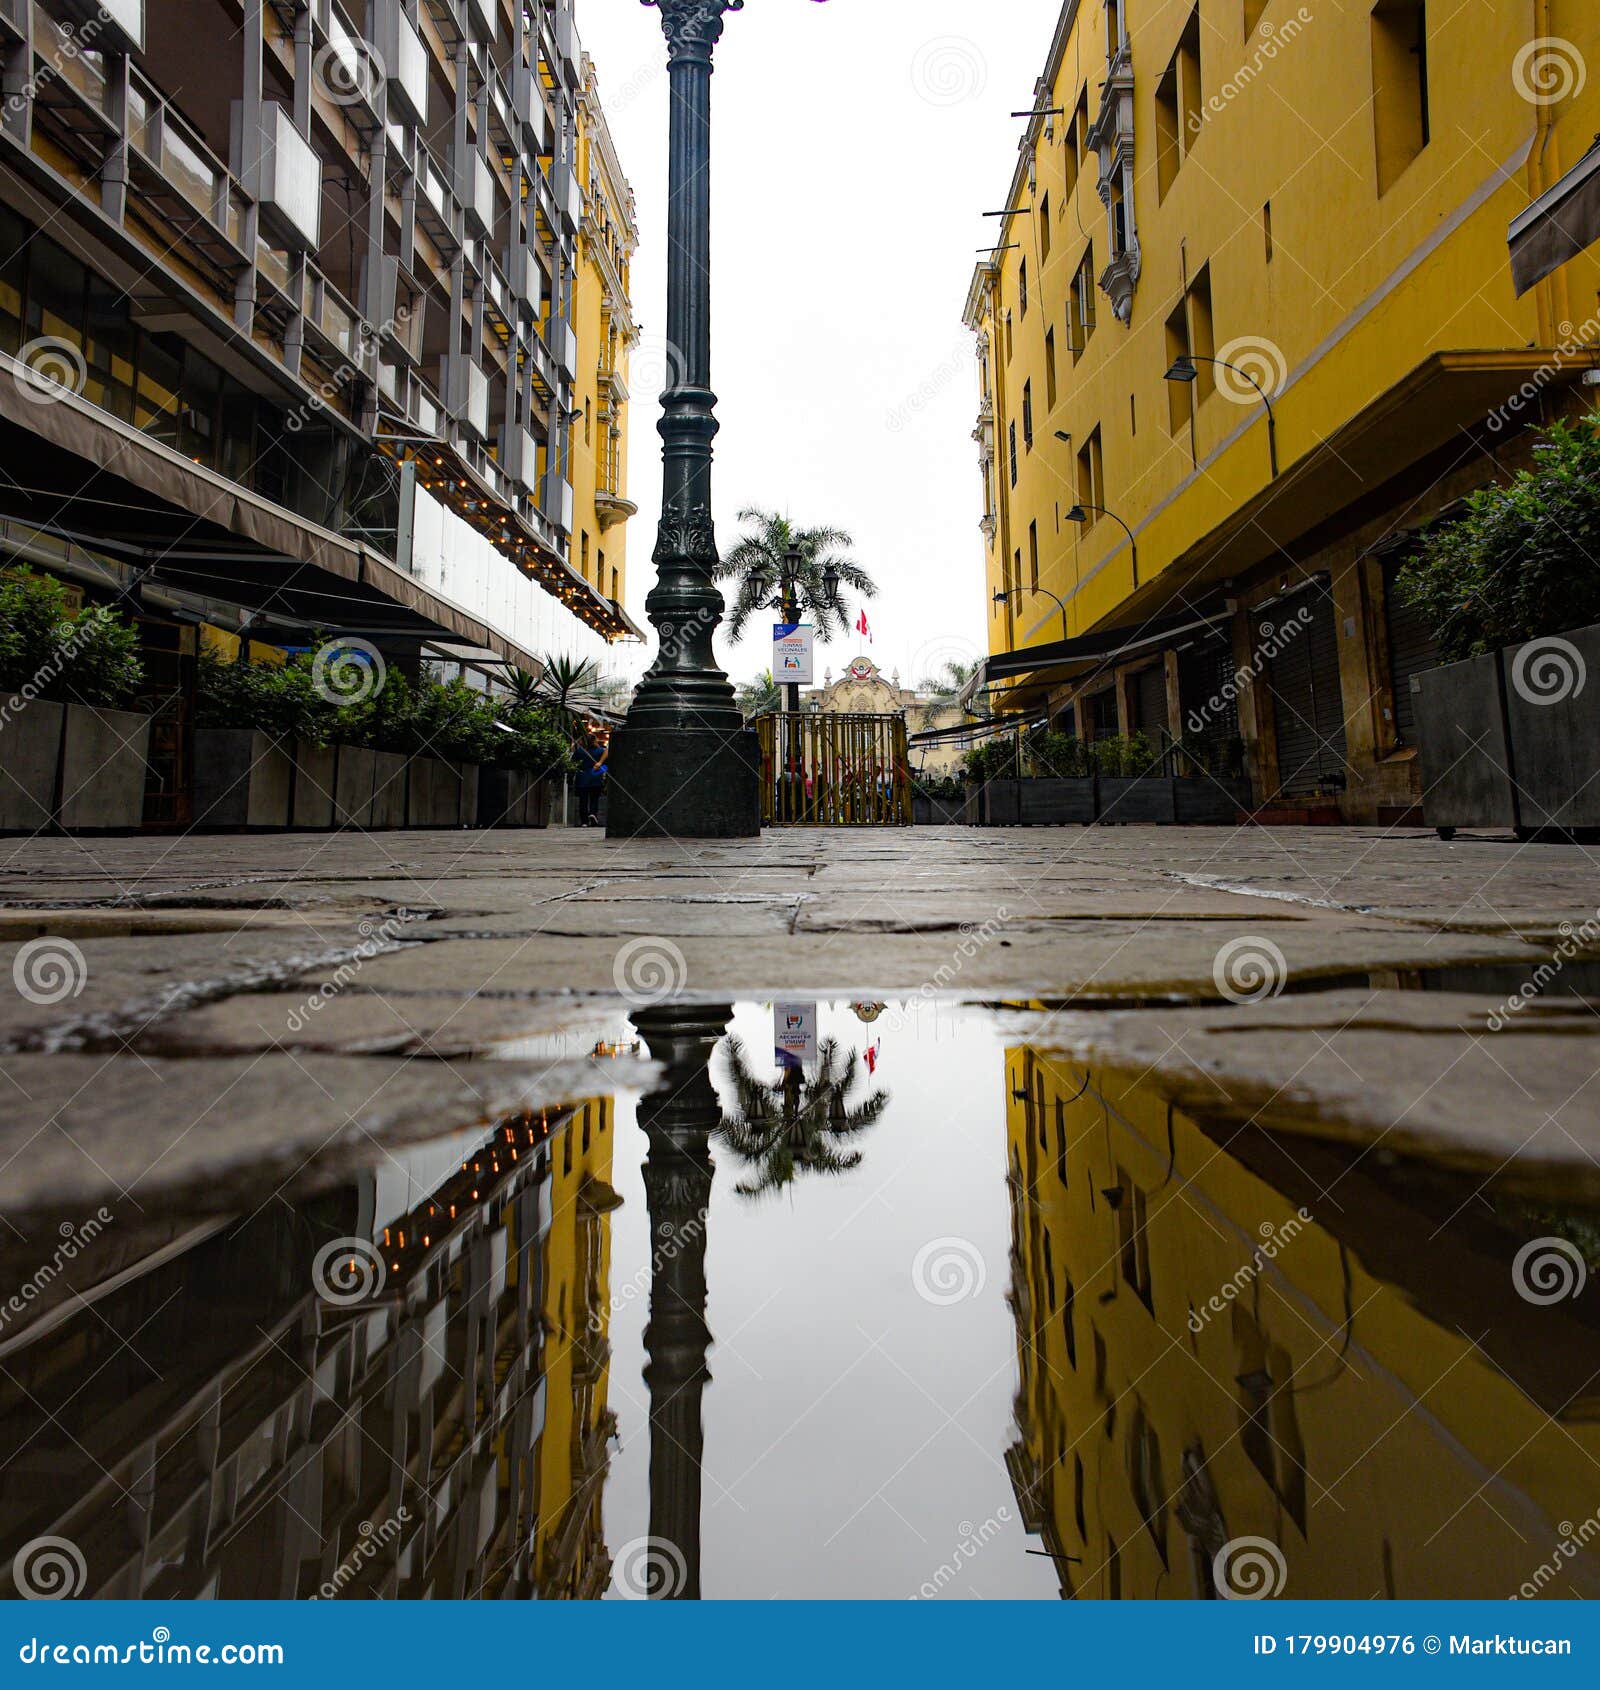 reflections of the plaza de armas in the historic center of lima, peru